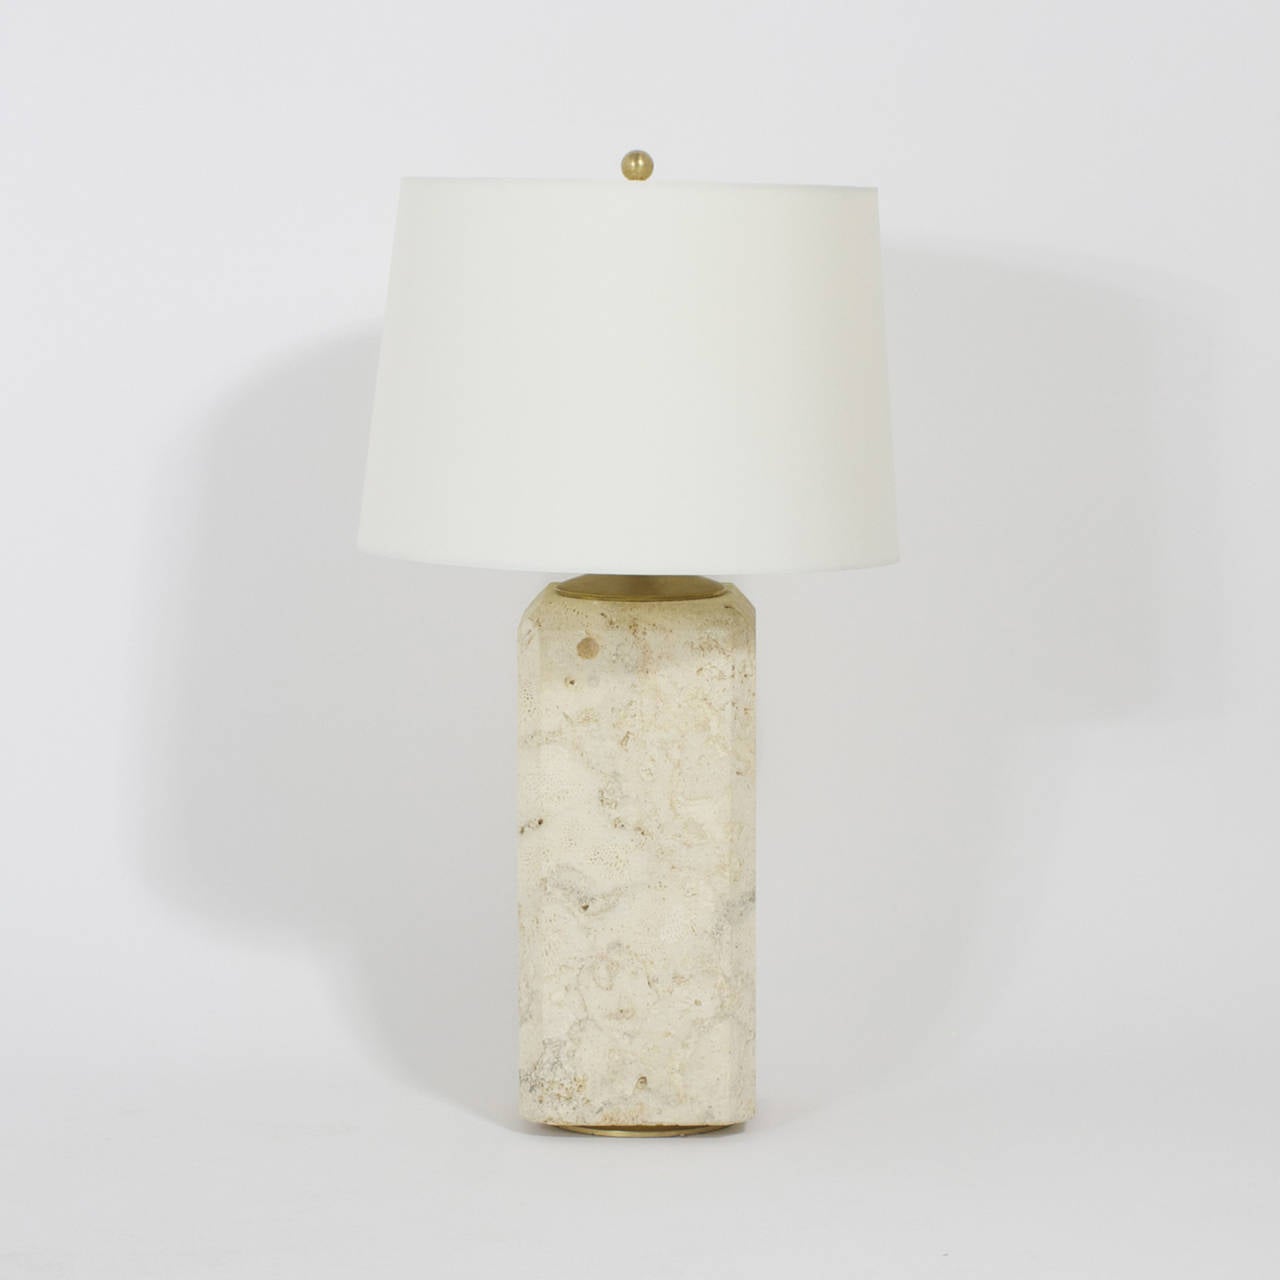 A handsome, mid century pair of coquina stone table lamps with beveled corners, and a chic sliver of a brass foot and over all decorated by Mother Nature. Newly wired.
A wonderful organic addition to your modern, beach, seaside or traditional decor.